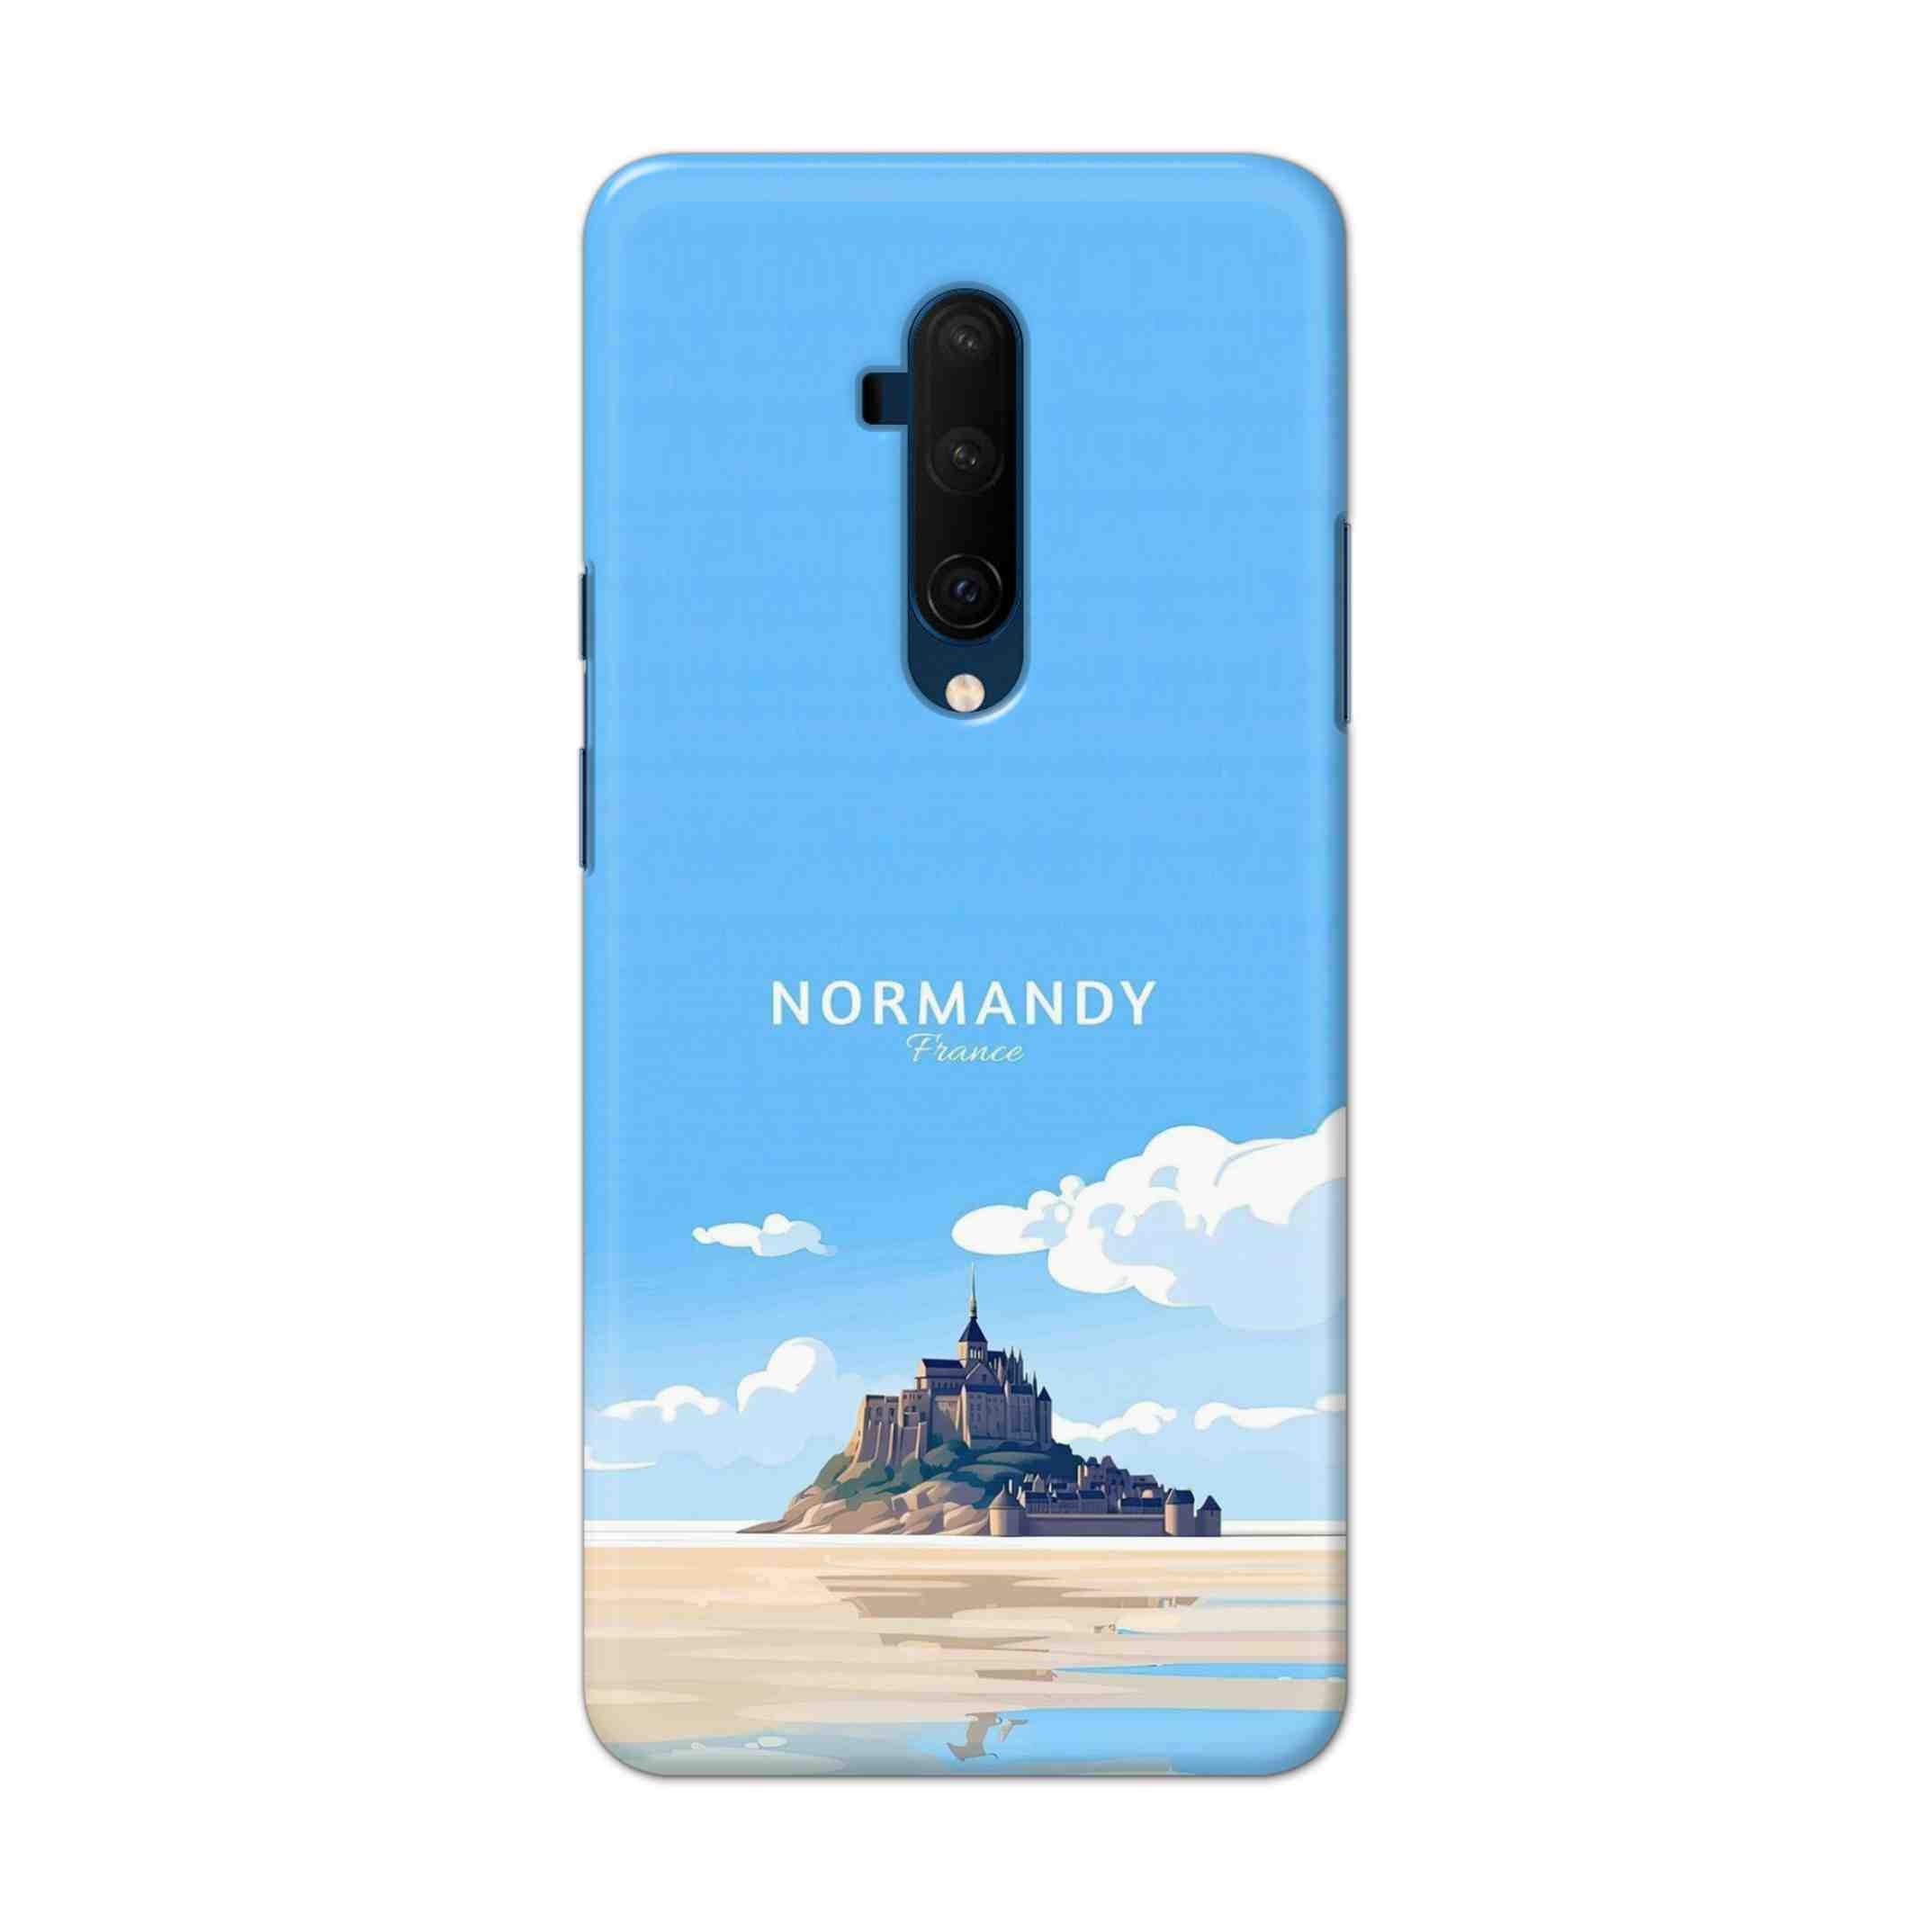 Buy Normandy Hard Back Mobile Phone Case Cover For OnePlus 7T Pro Online